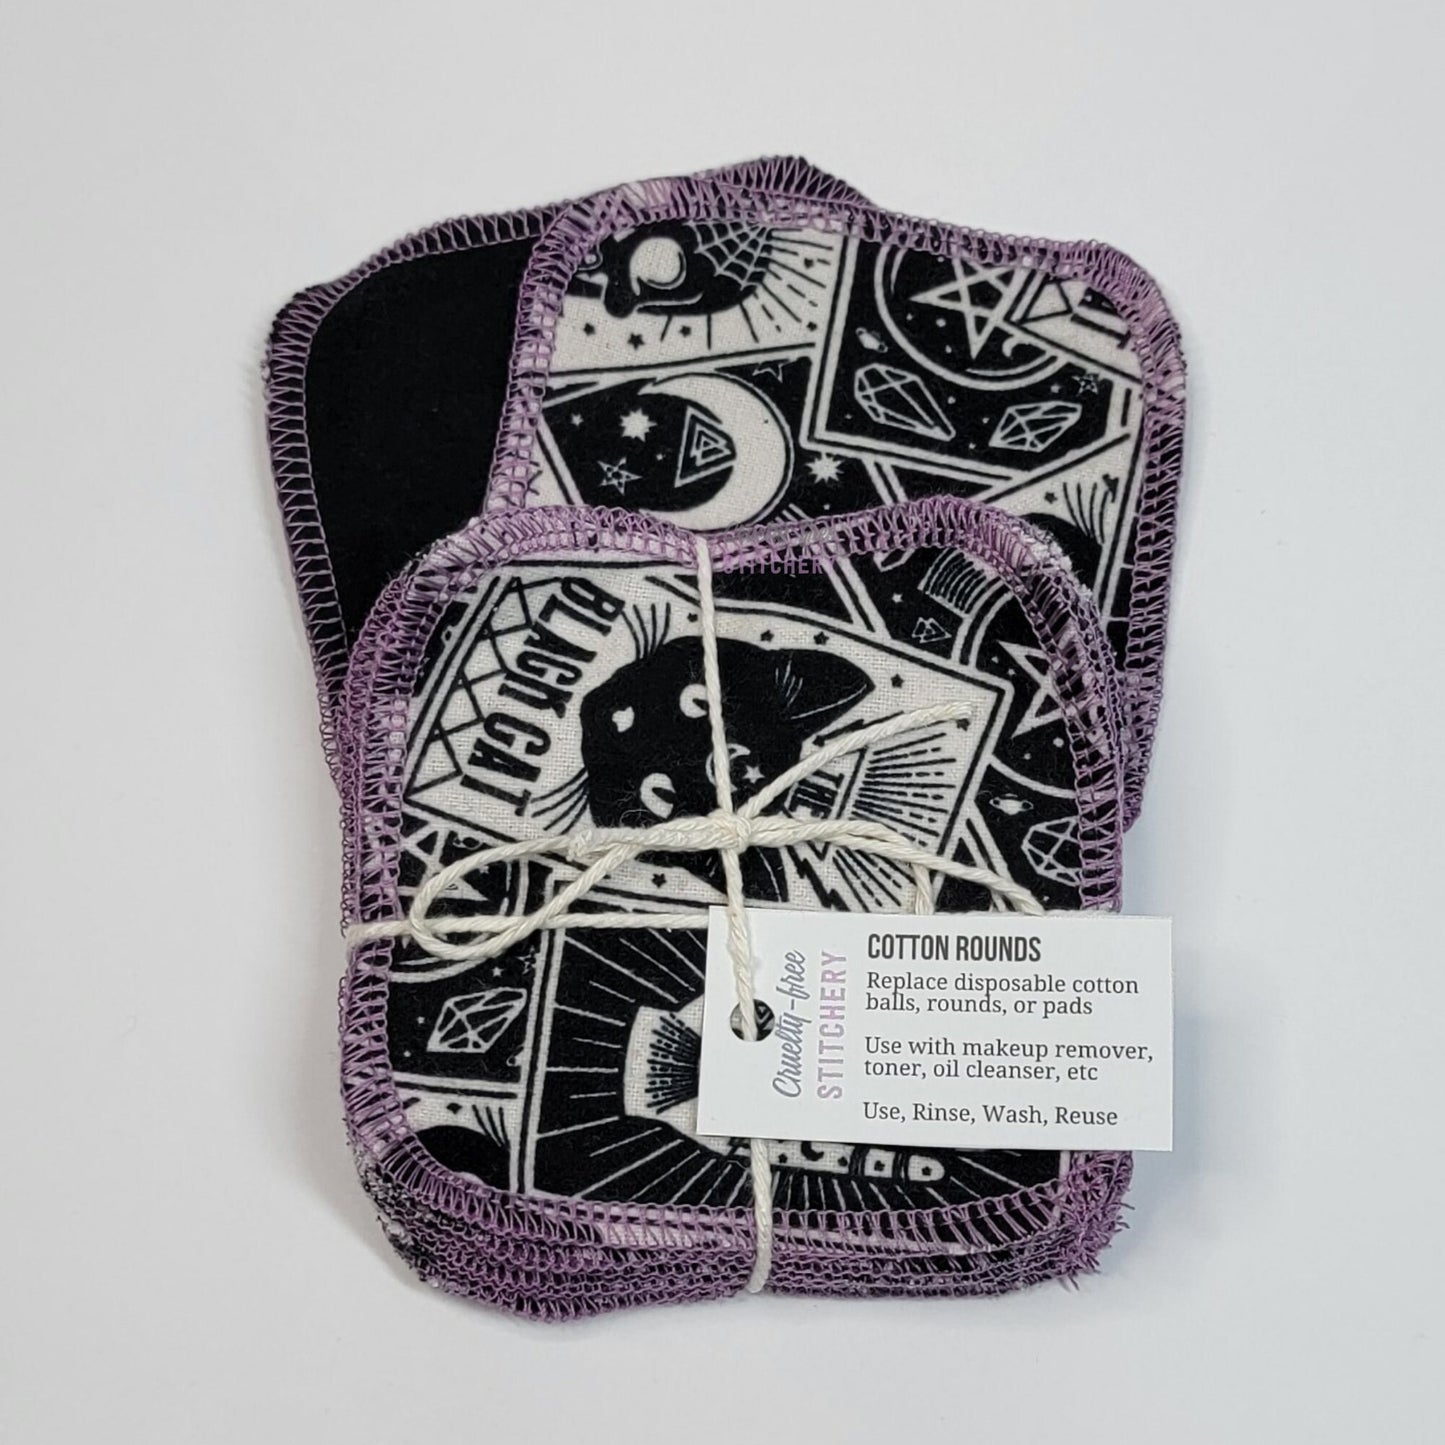 Tarot cards print reusable cotton rounds, a bundled pack tied with cotton string and a small paper tag, on top of one face-up and one face-down to show the different sides.